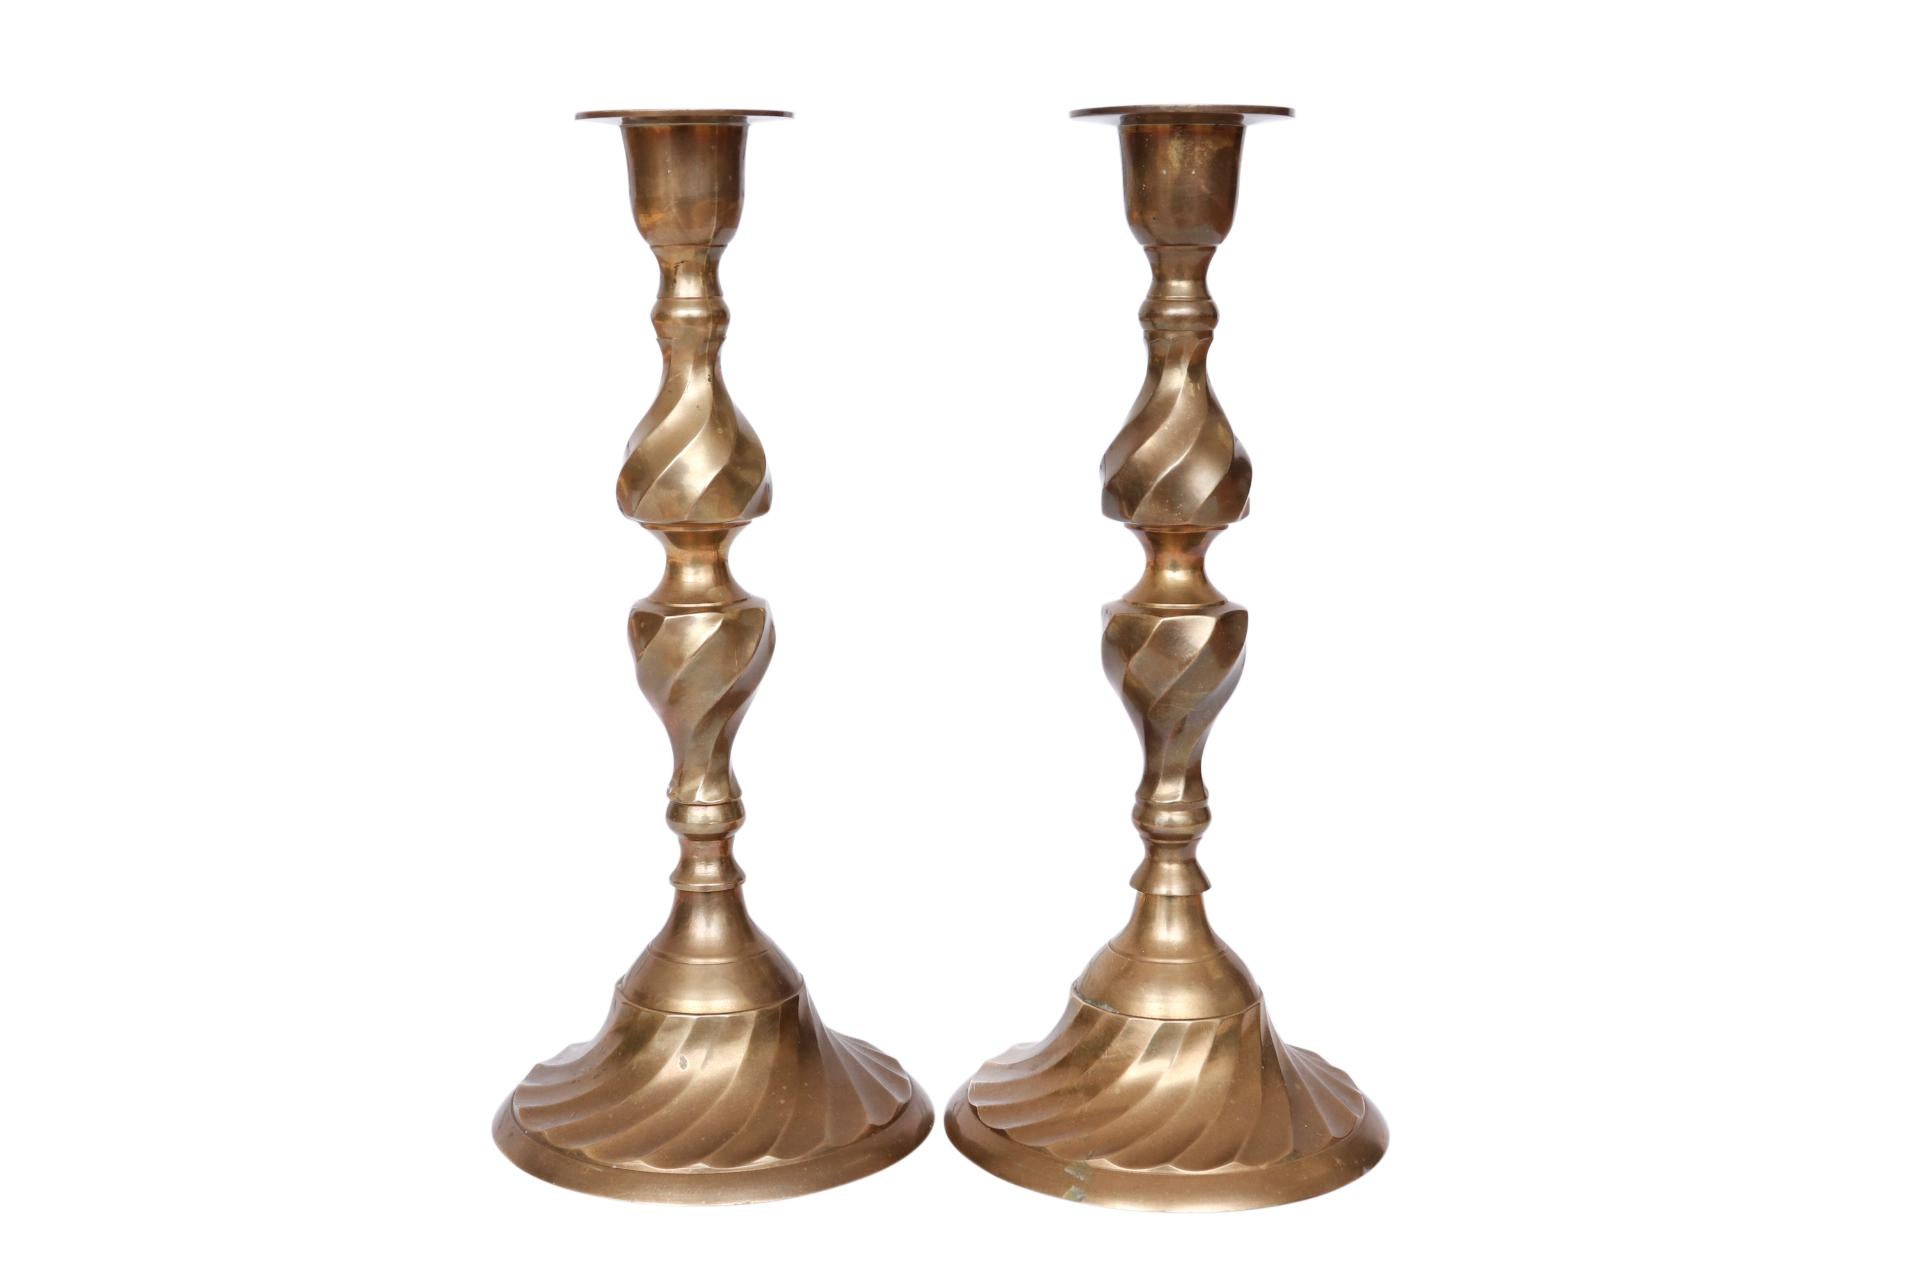 A pair of traditional brass candlesticks. Columns are turned with a double vase shape decorated with a square twist and a wide round base. Simple capitals have a small drip pan. Dimensions per candlestick.